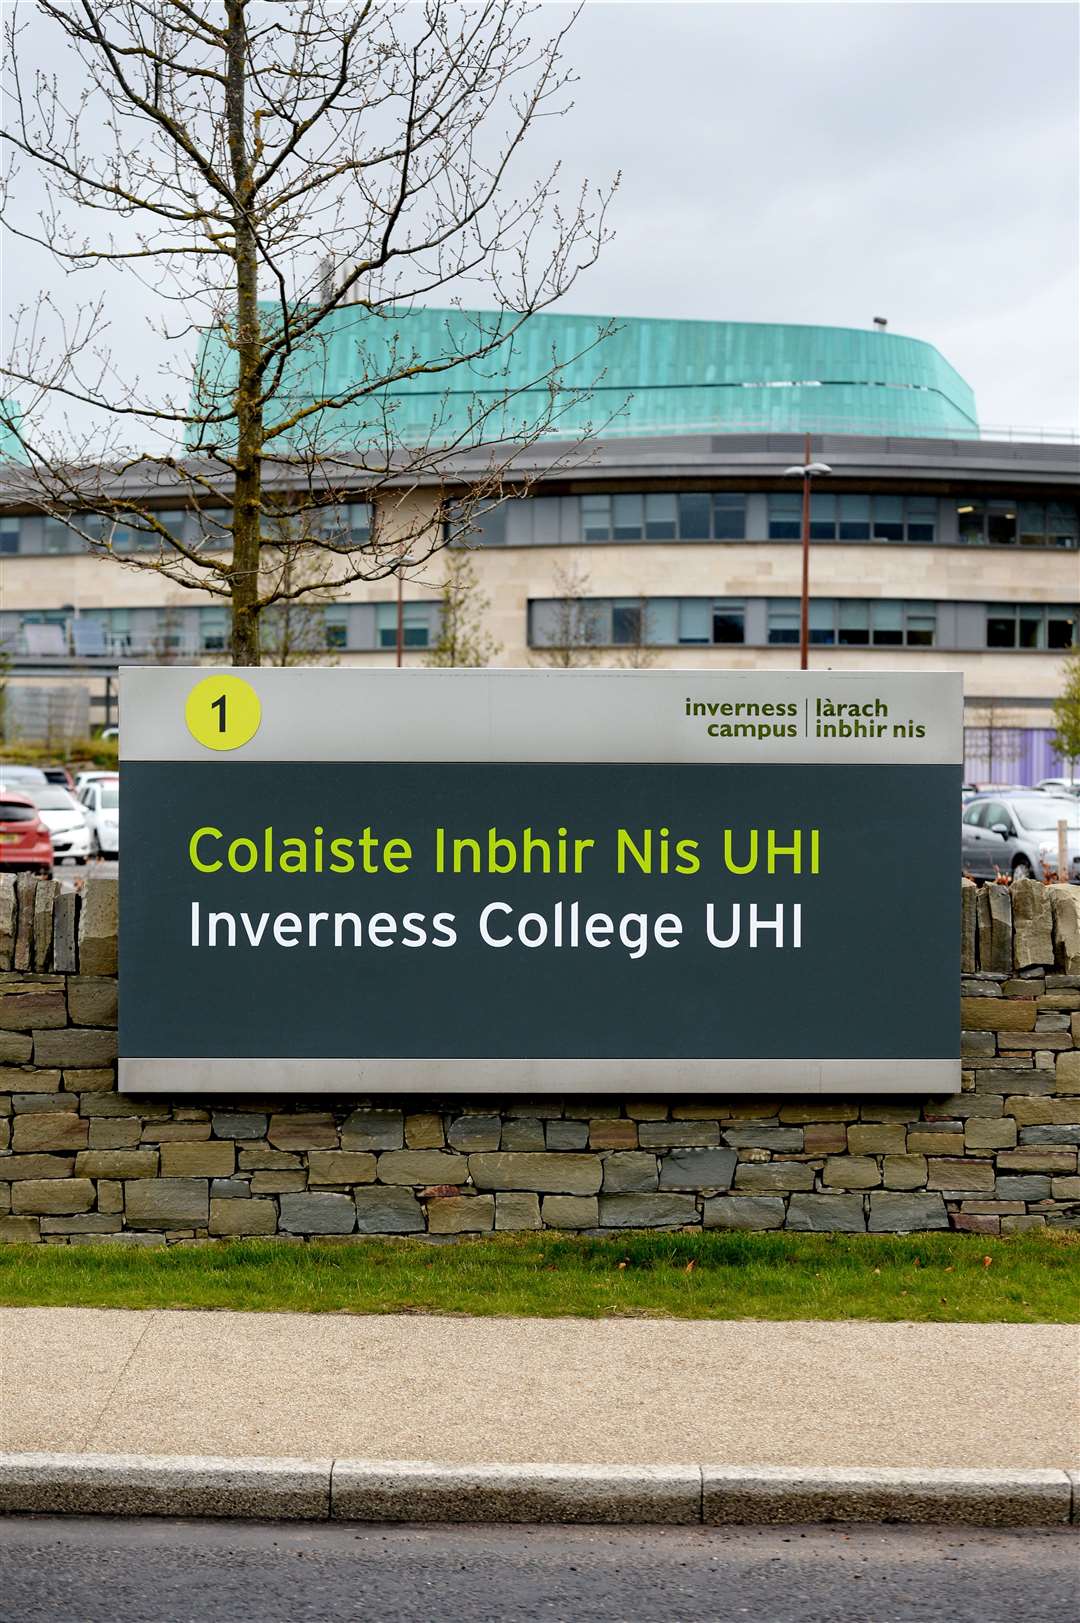 Face-to-face teaching suspended throughout UHI.